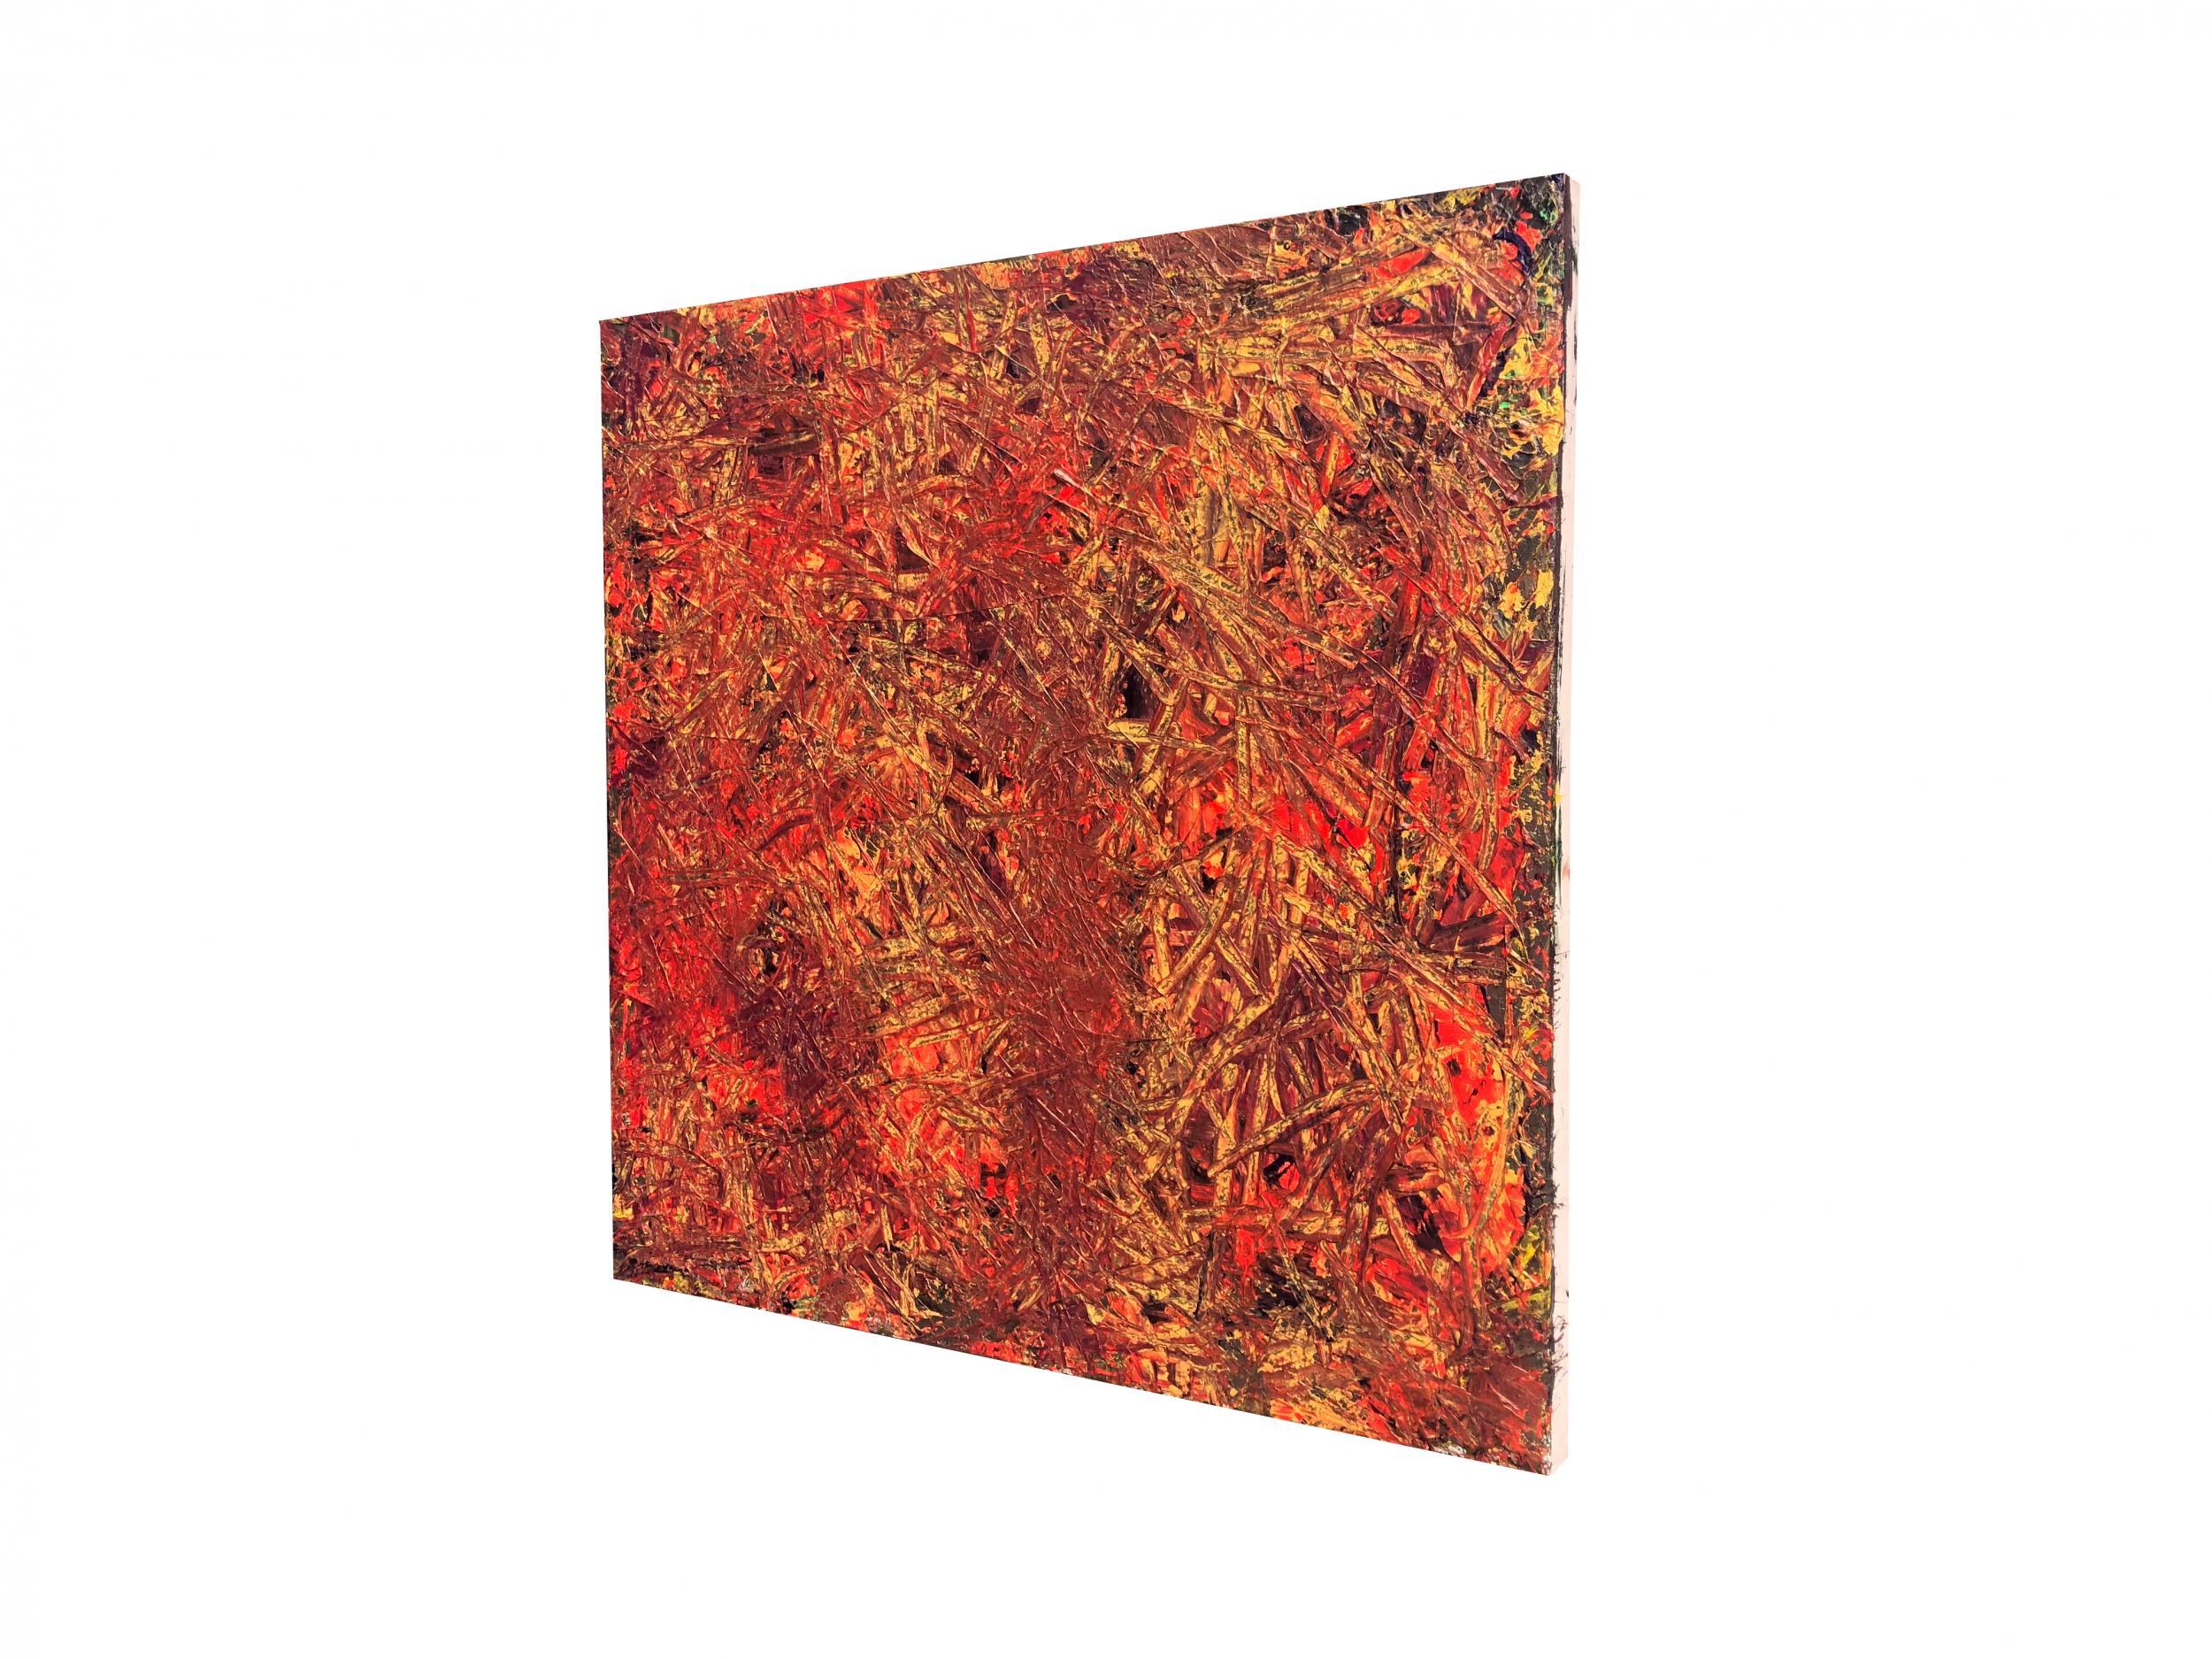 In The Line Of Fire By Troy Smith Fine Art Abstract Art - Orange Abstract Painting by Troy Smith Studio